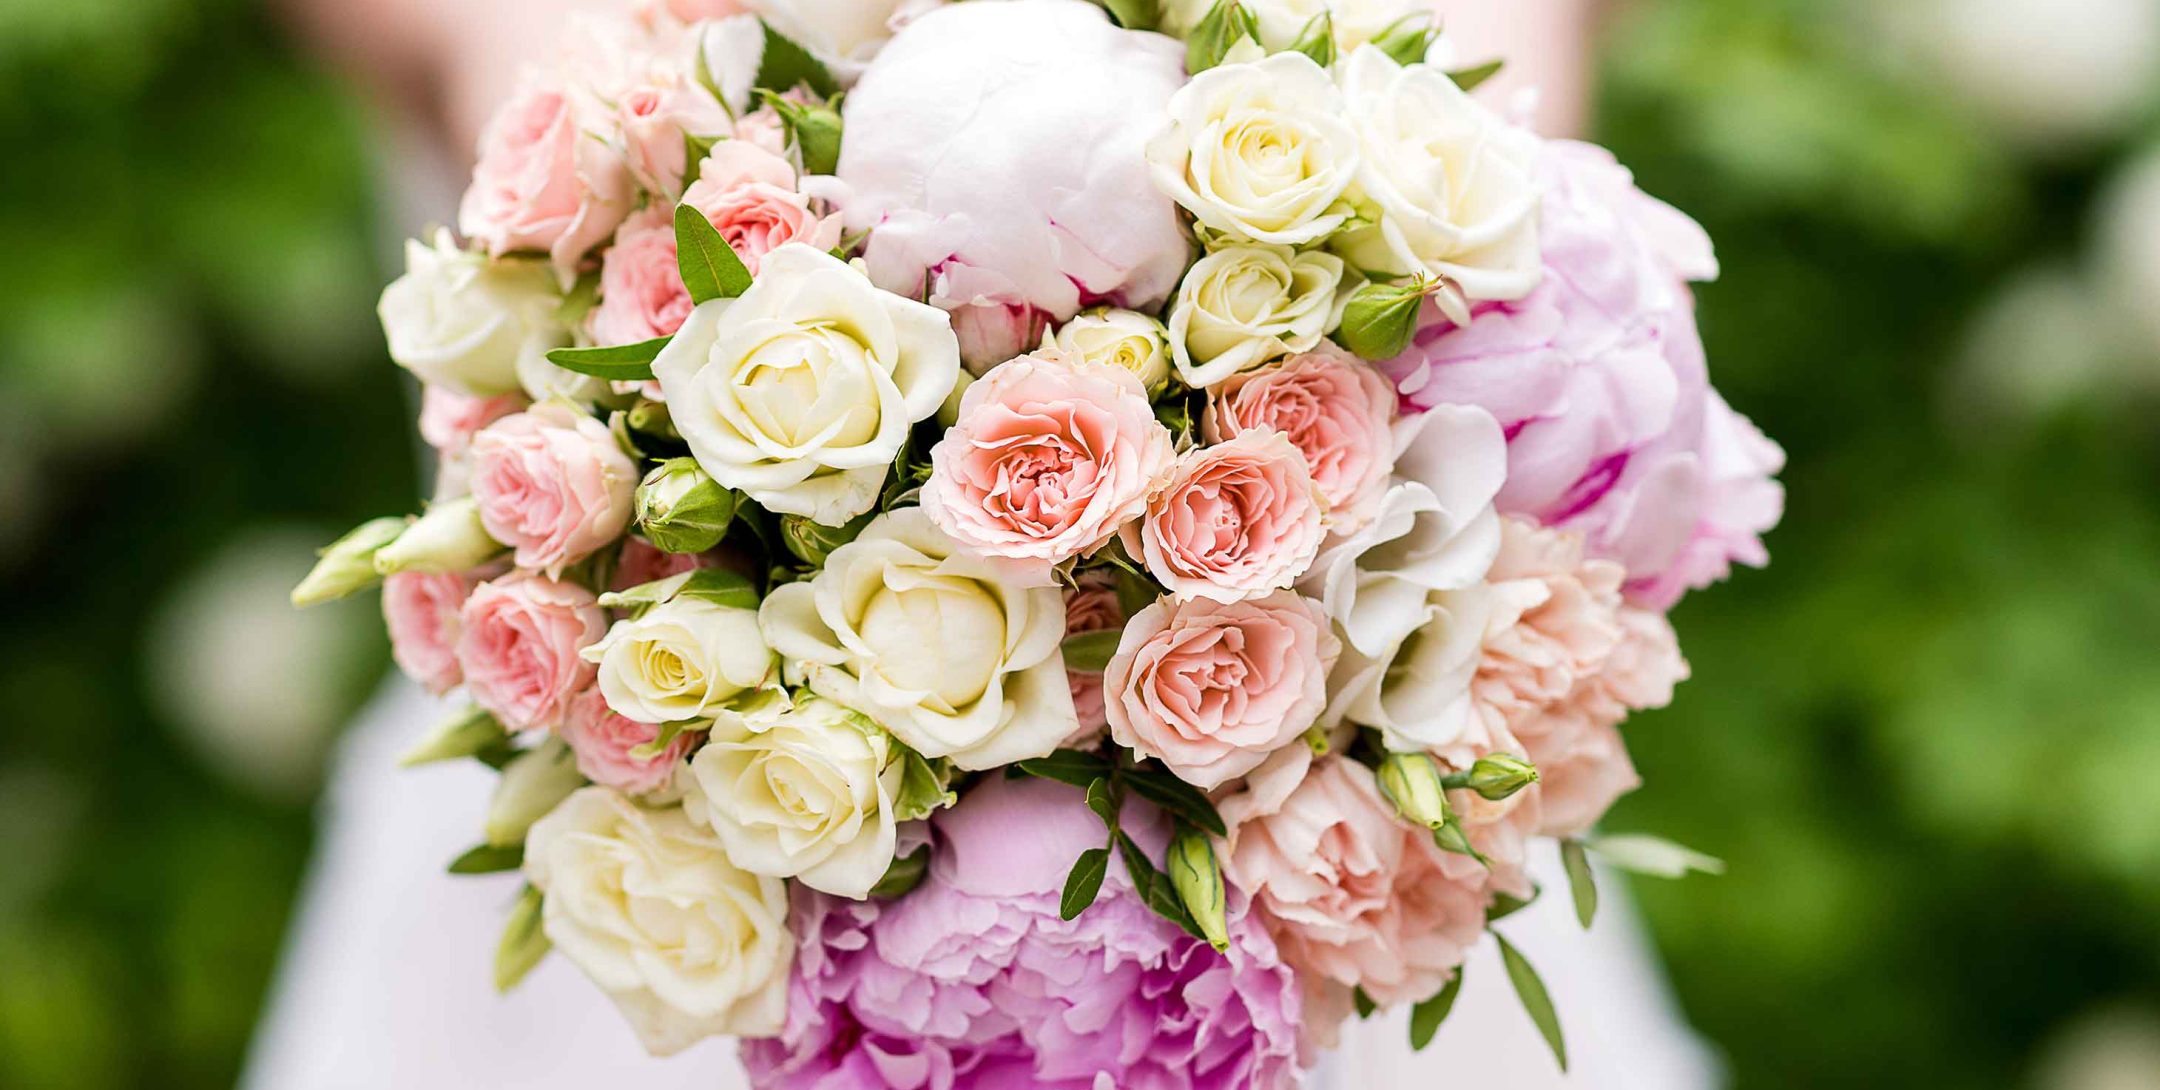 Close up of bride holding a pink and white wedding bouquet